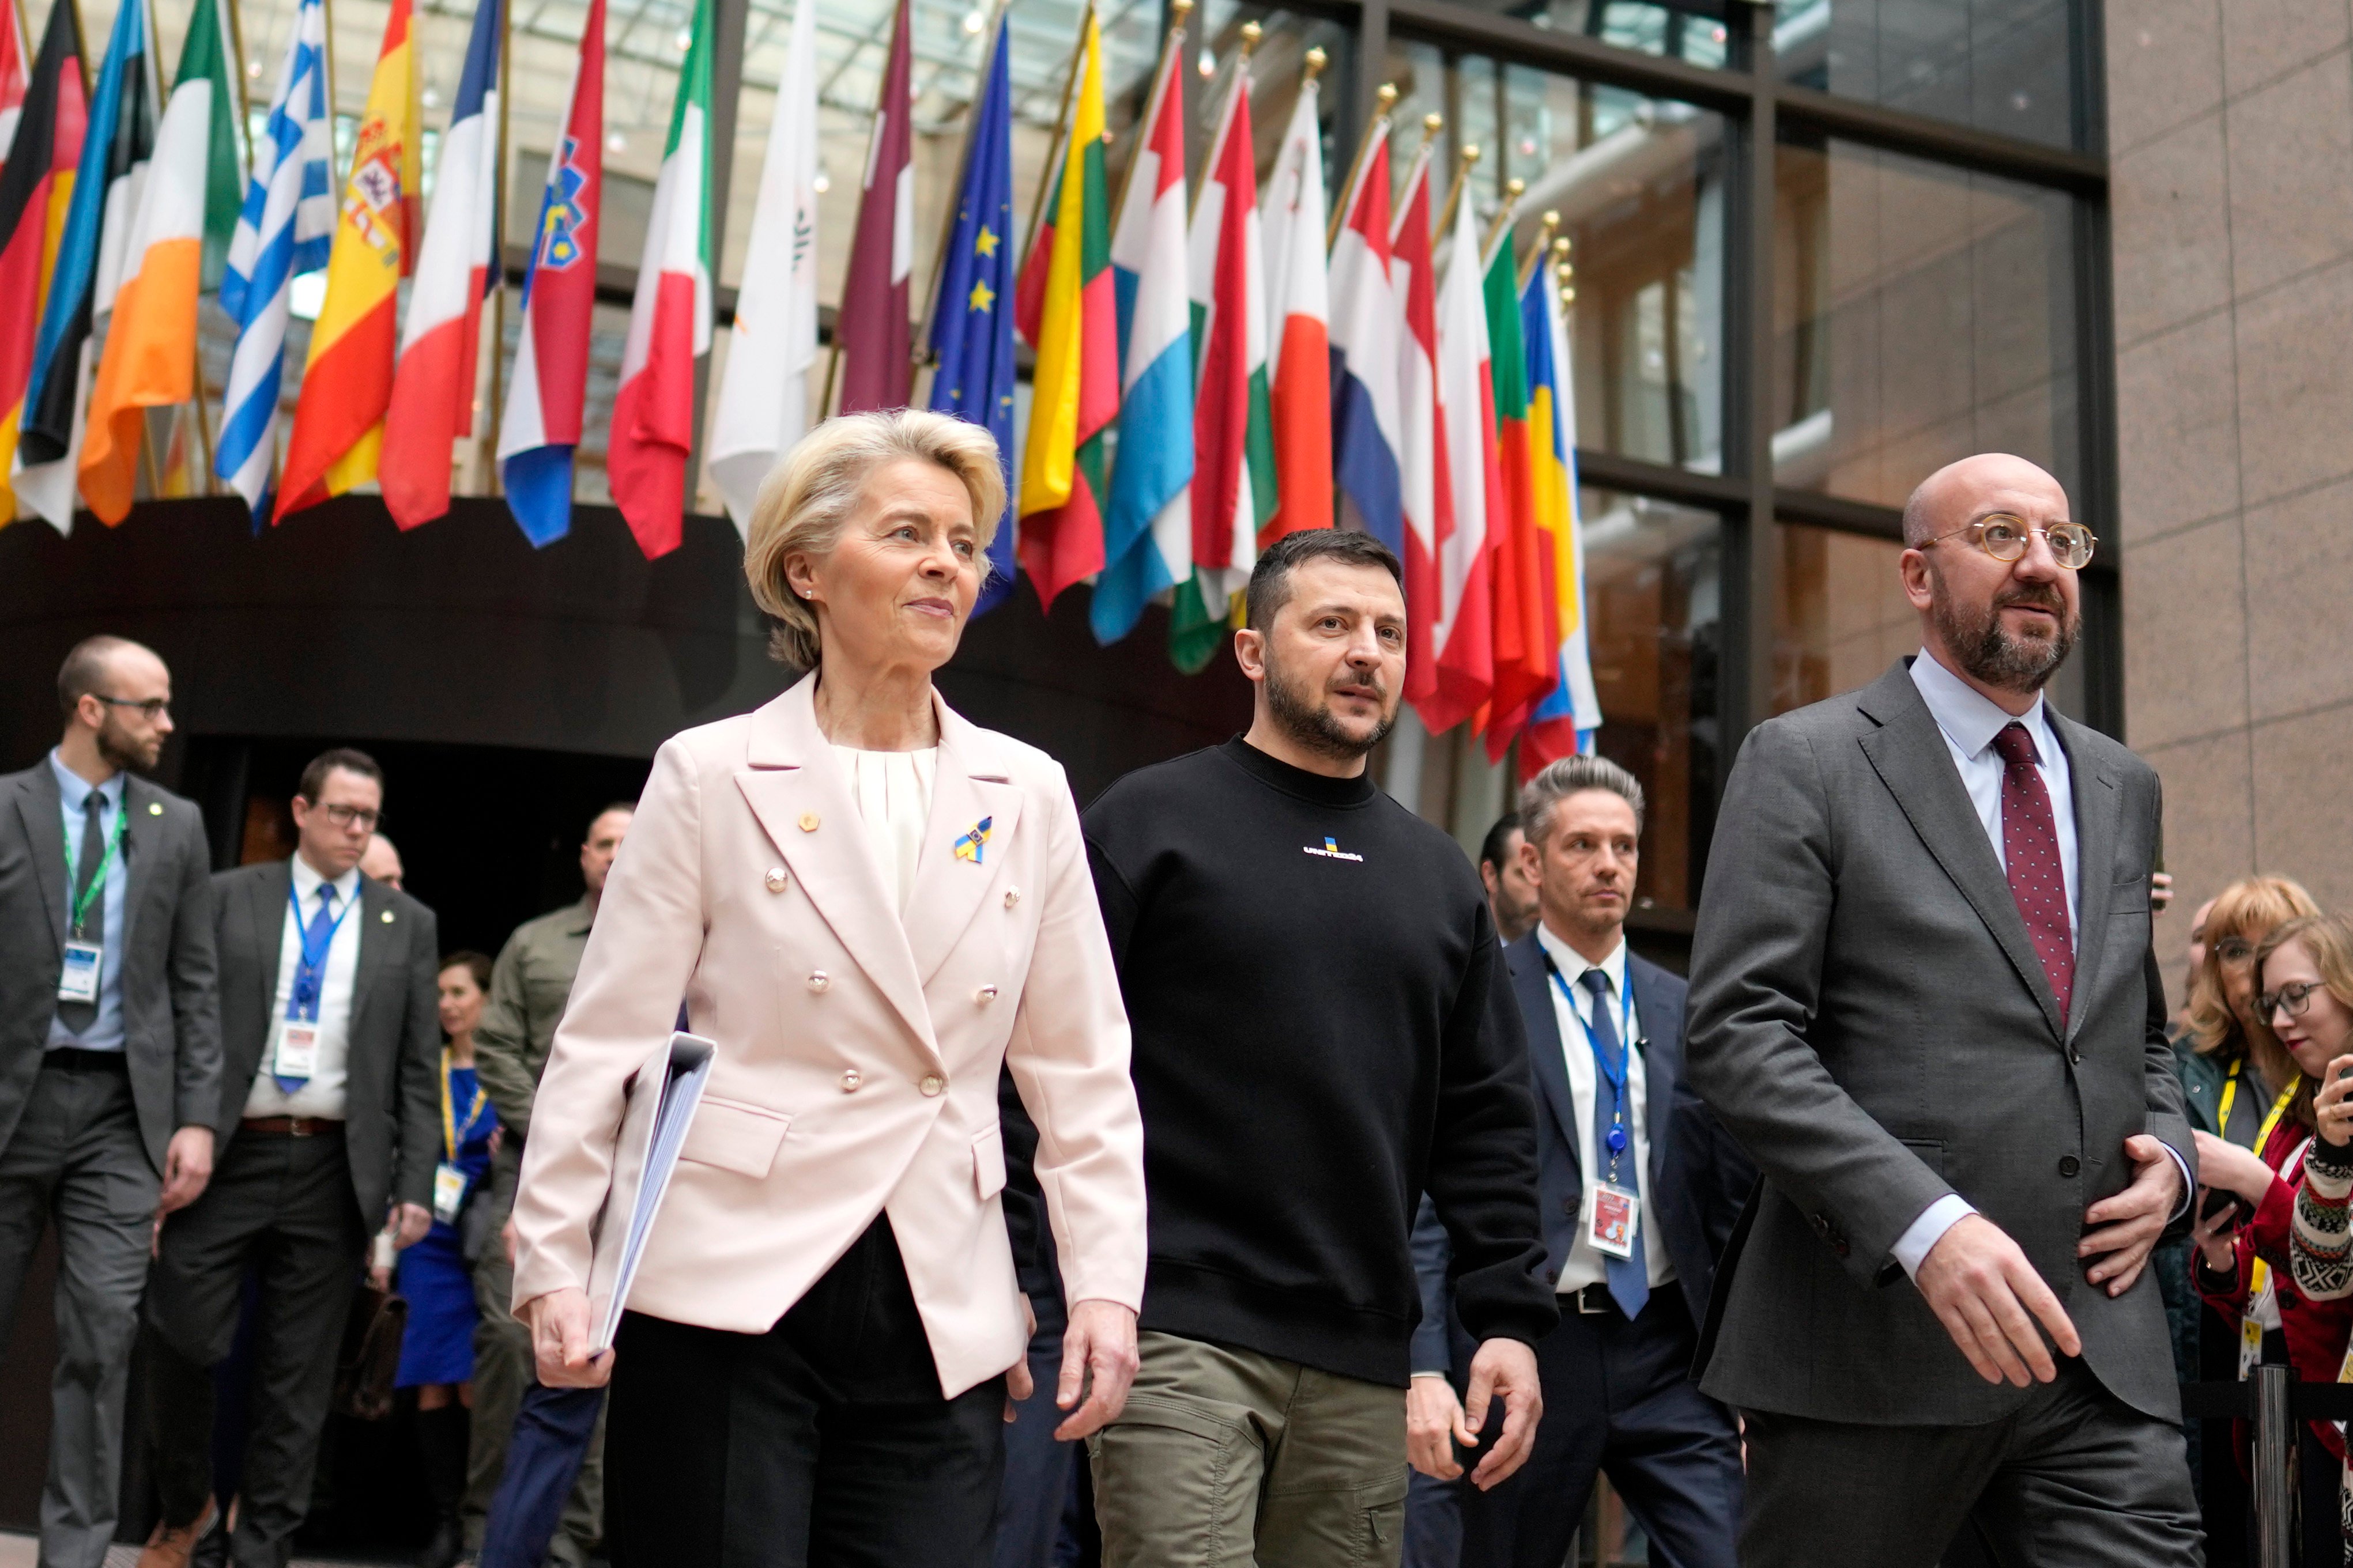 European Commission President Ursula von der Leyen, Ukraine’s President Volodymyr Zelenskyy and European Council President Charles Michel walk together during an EU summit in Brussels on February 9. The EU and Nato should seek a diplomatic solution to the Ukraine war, rather than Russia’s defeat. Photo: AP